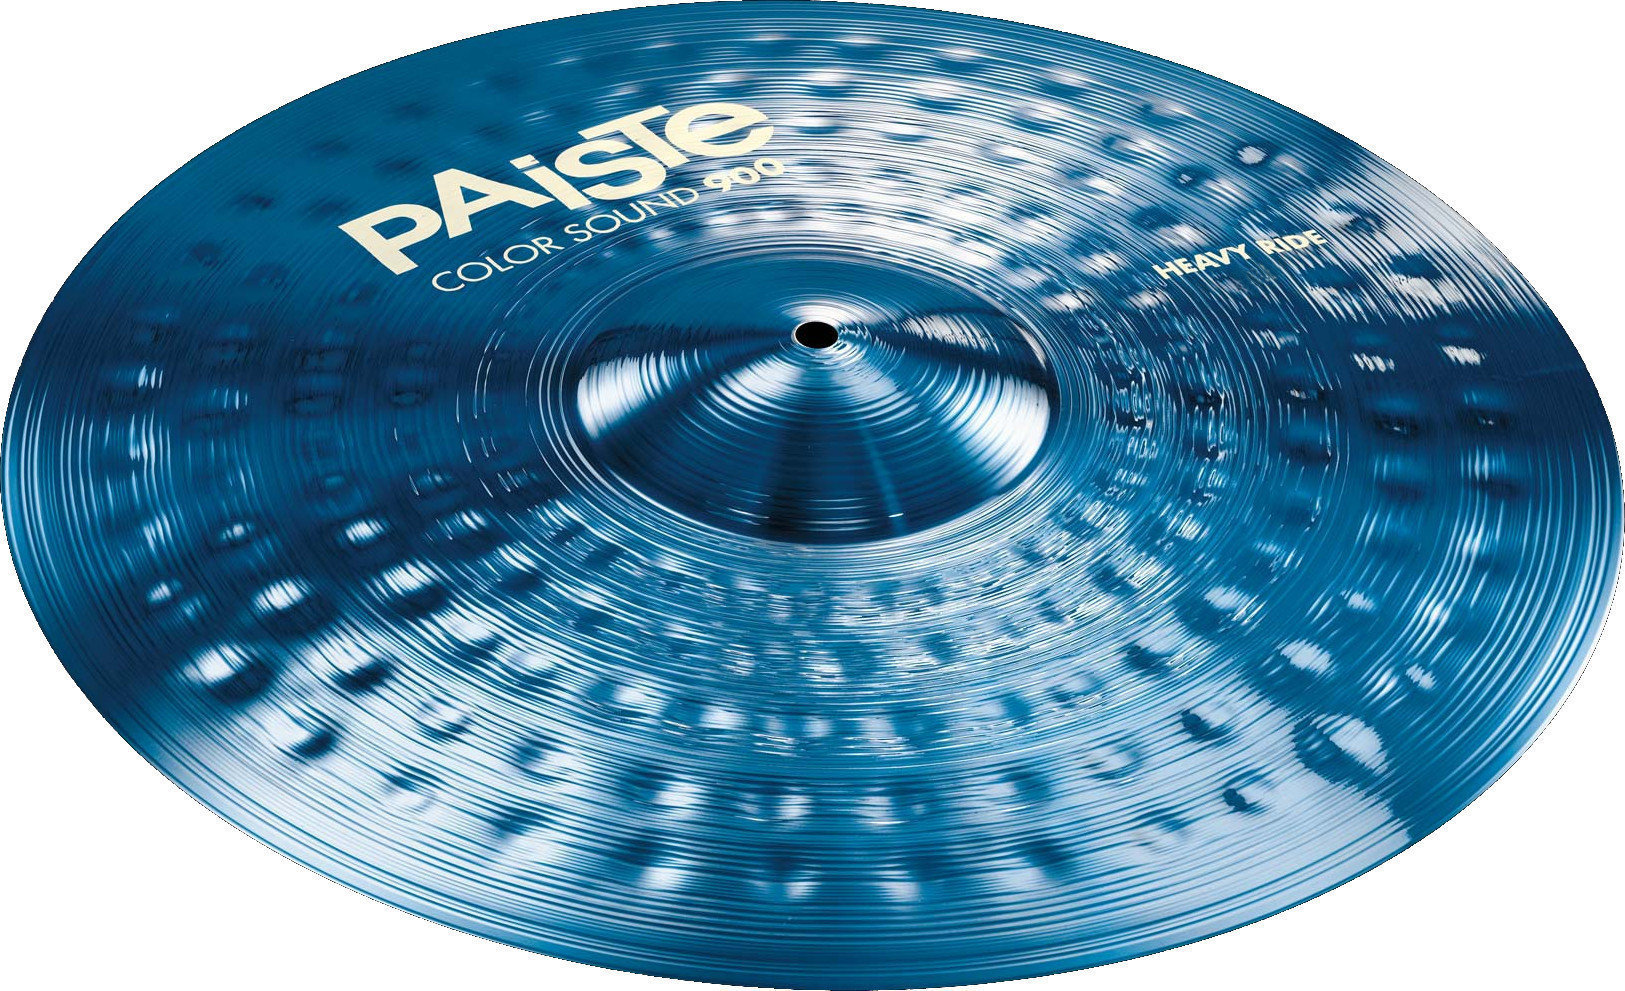 Ride Cymbal Paiste Color Sound 900  Heavy Ride Cymbal 22" Blå